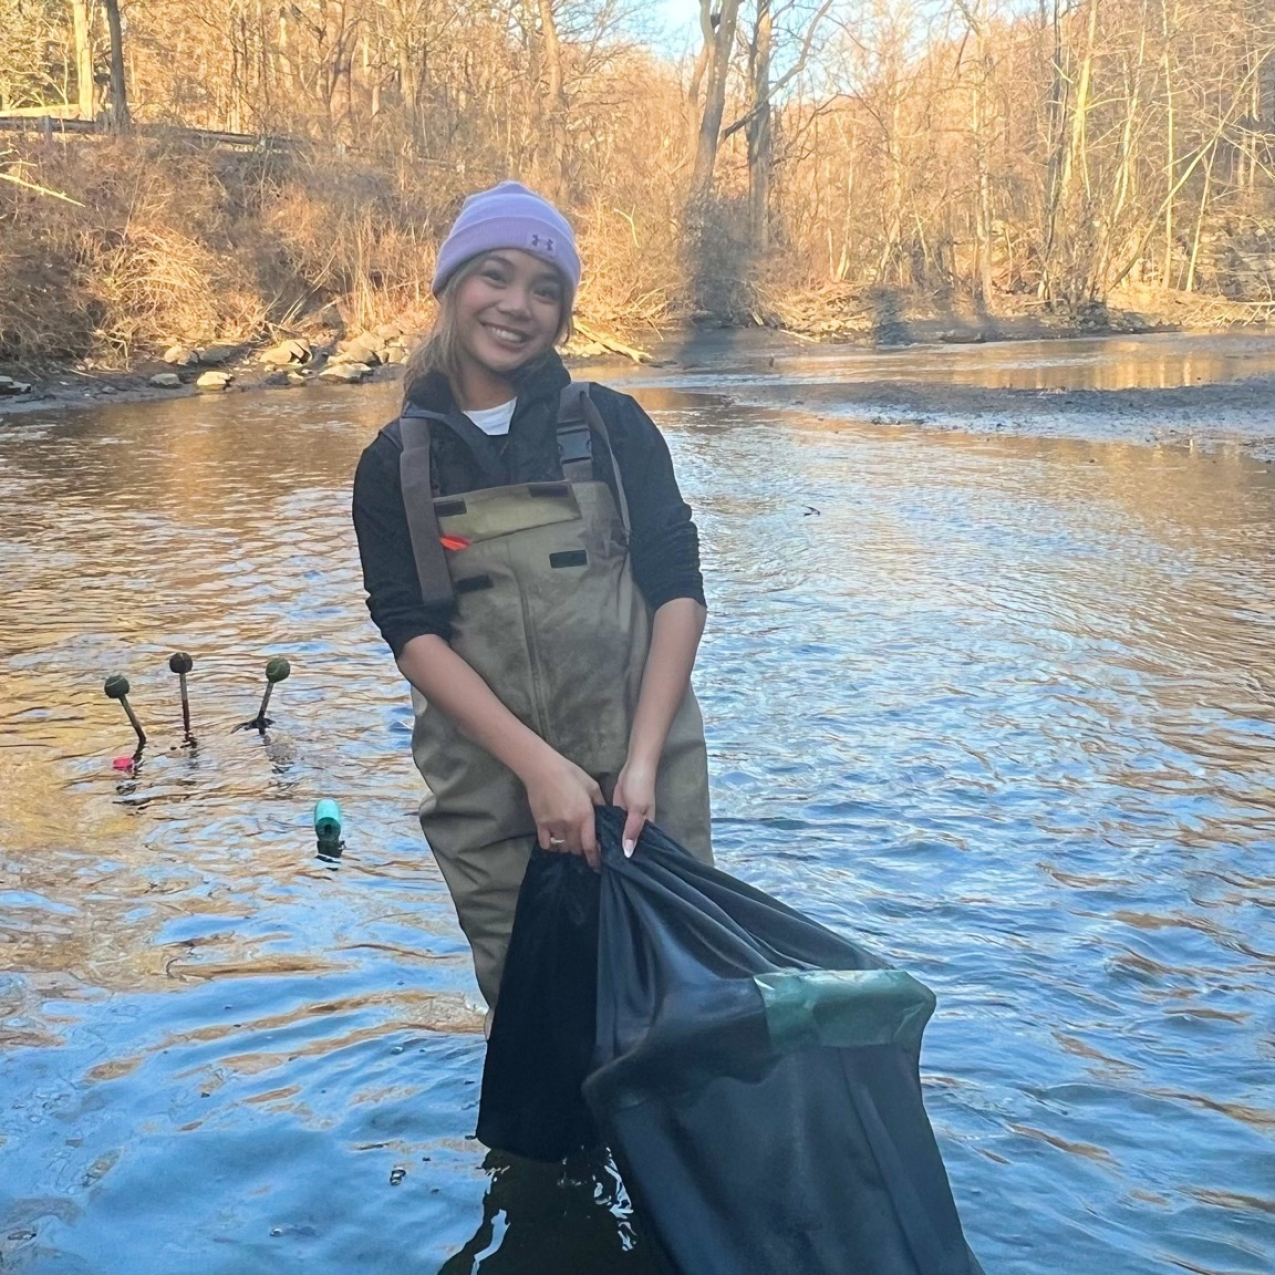 Eva Lagdamen is staning in a river with relatively still water holding a large black nylon bag that is used to capture glass eels for counting. She is surrounded by a few rocks, as well as bare brush in the background. She is wearing a purple beanie, a black sweatshirt, and brown waders.